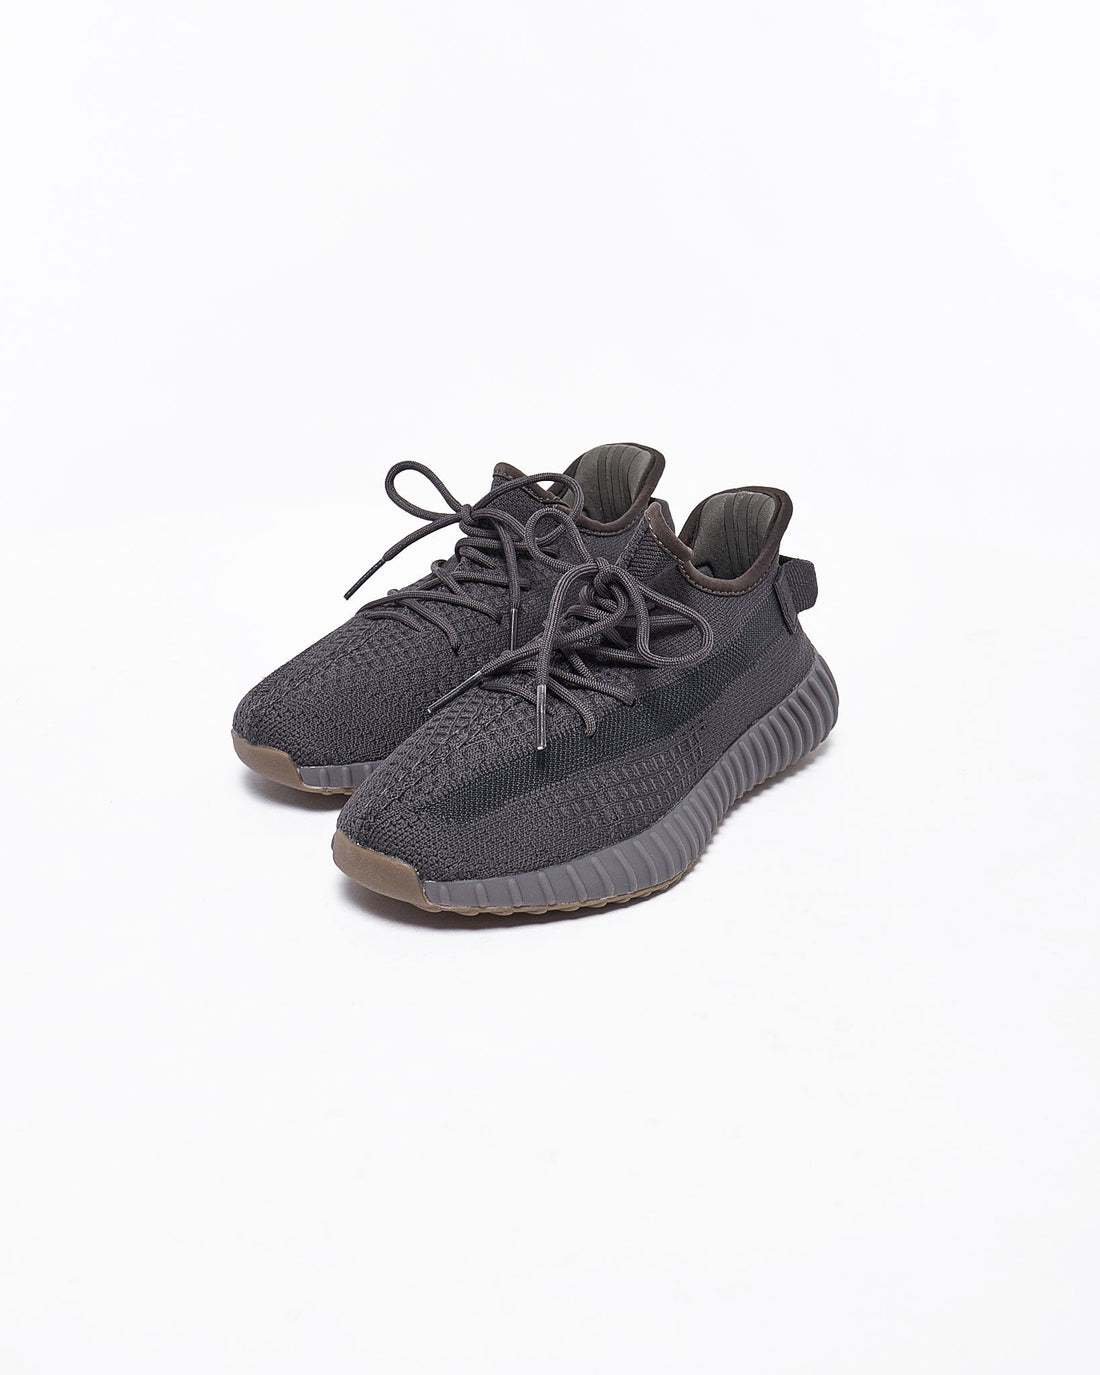 MOI OUTFIT-Yeezy Boost Men Shoes 75.90